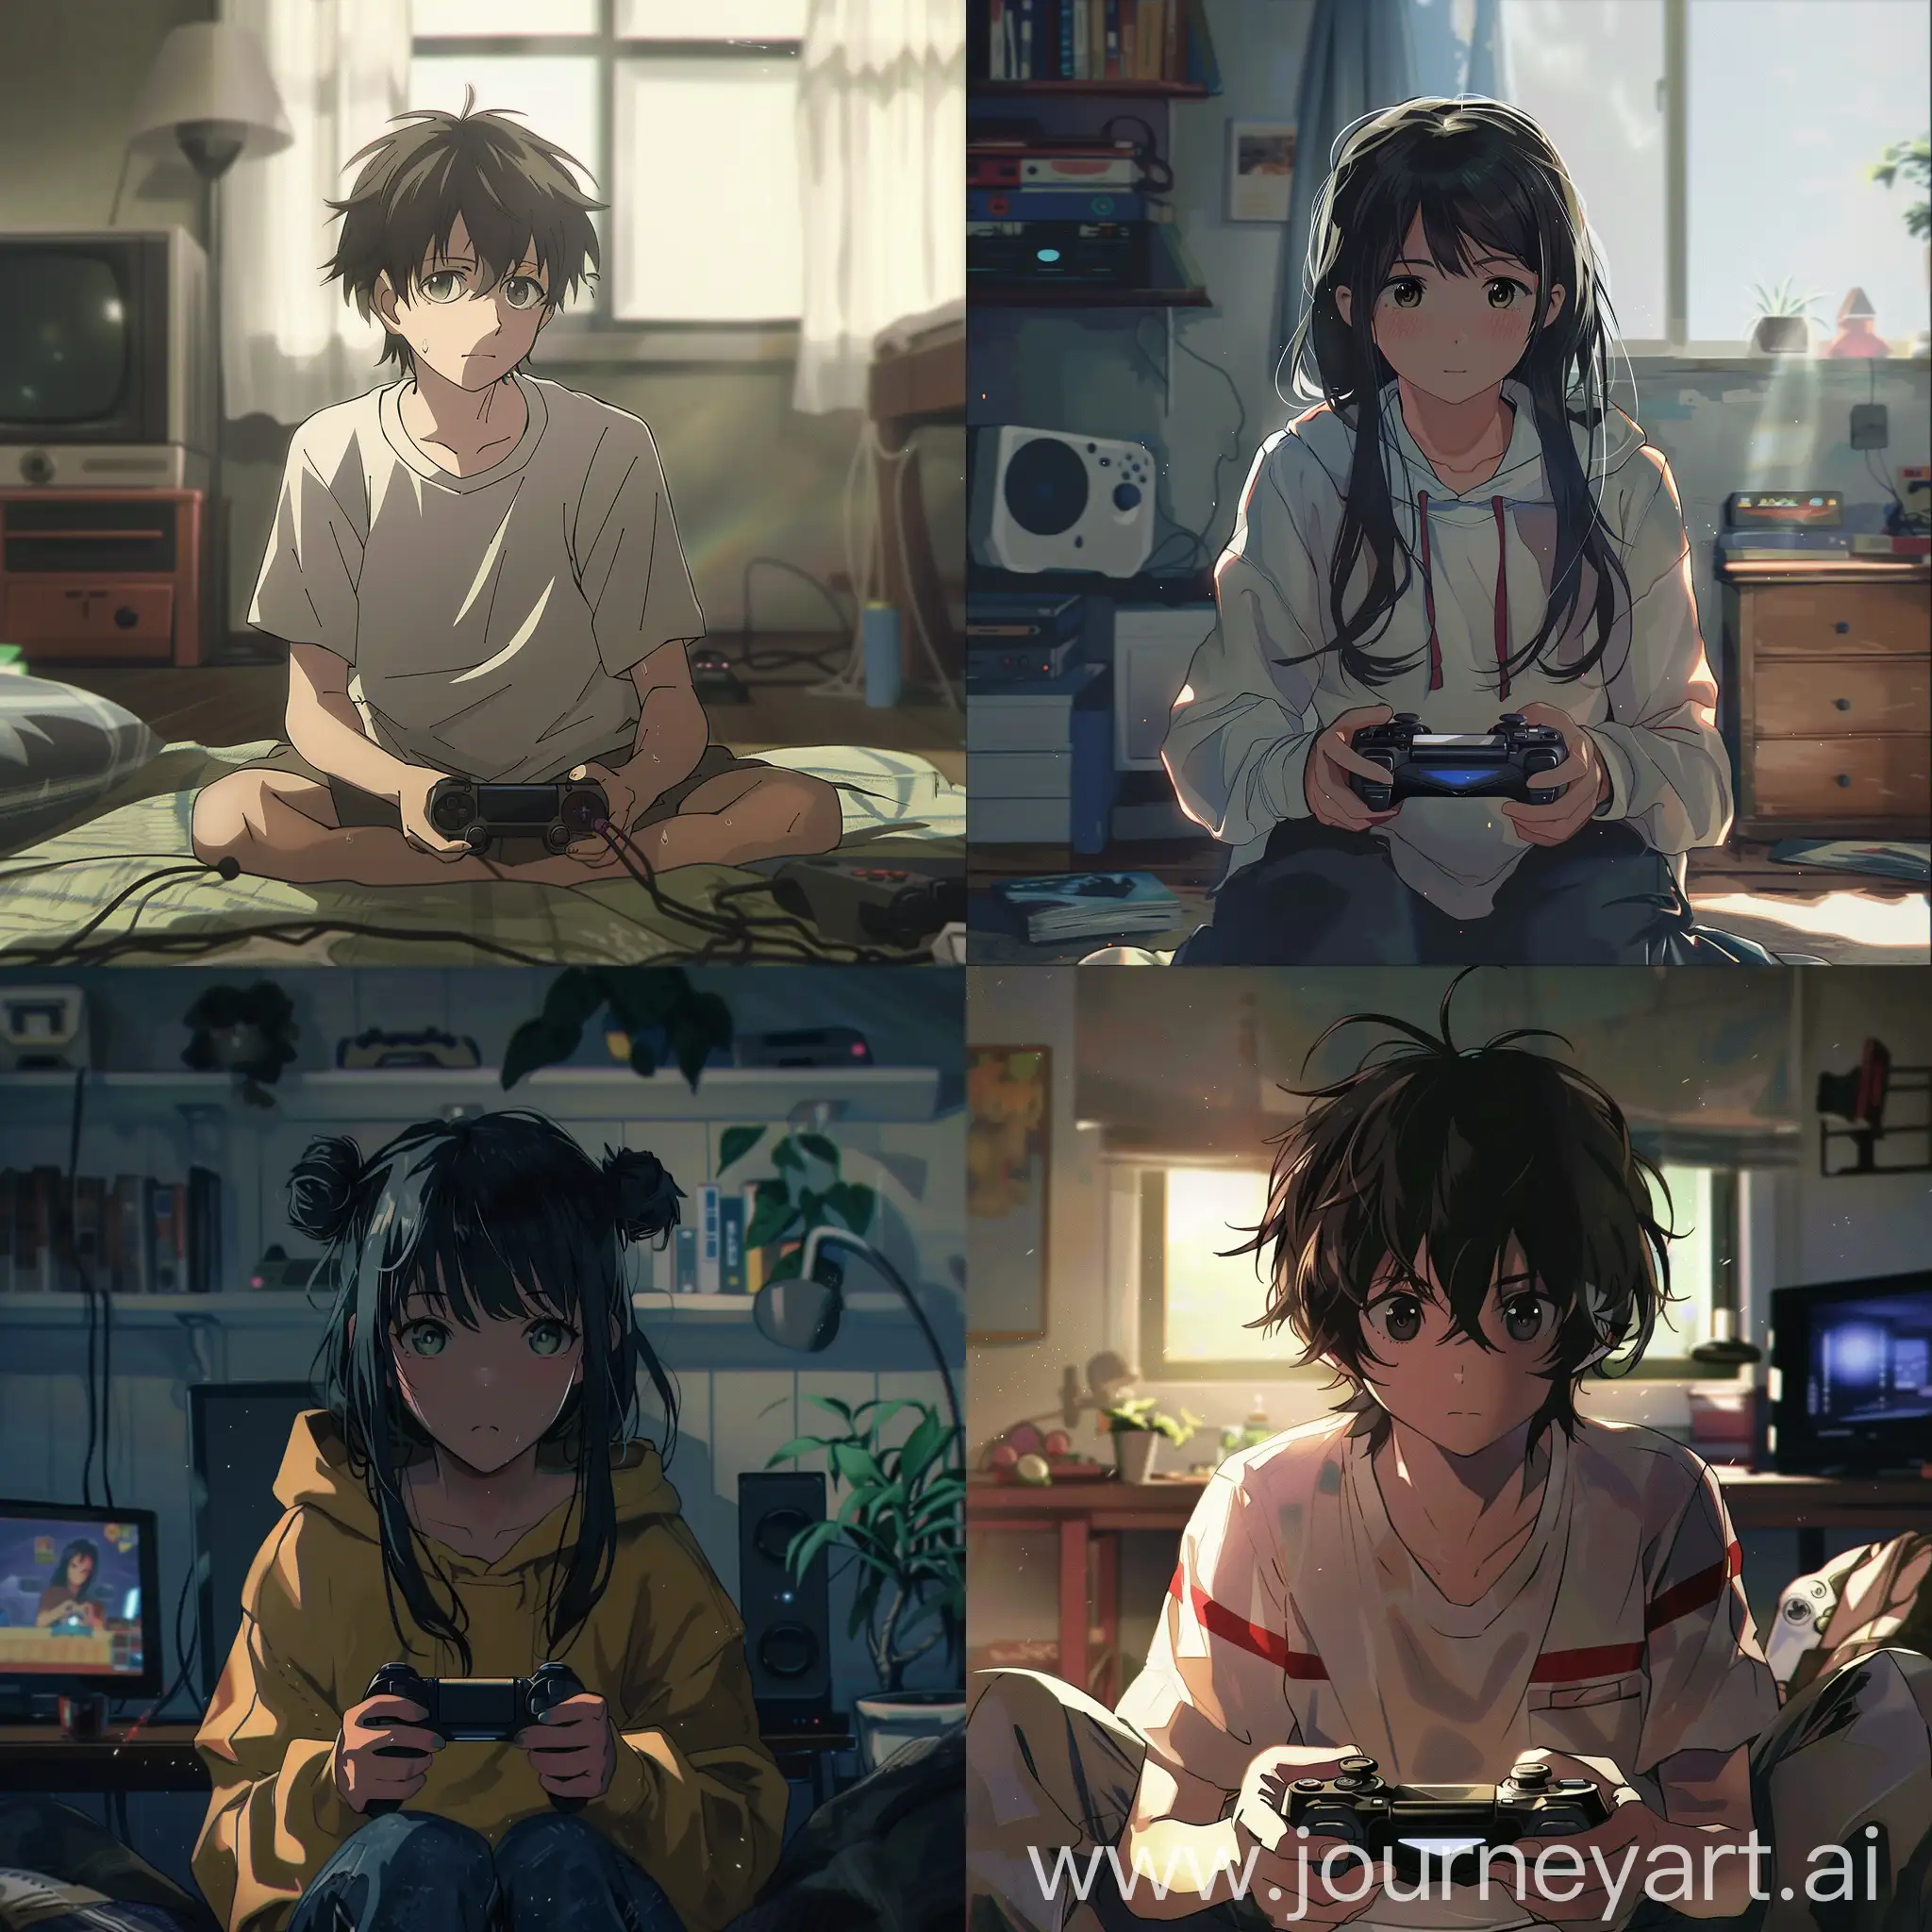 Anime-Student-Playing-Videogames-with-Intense-Focus